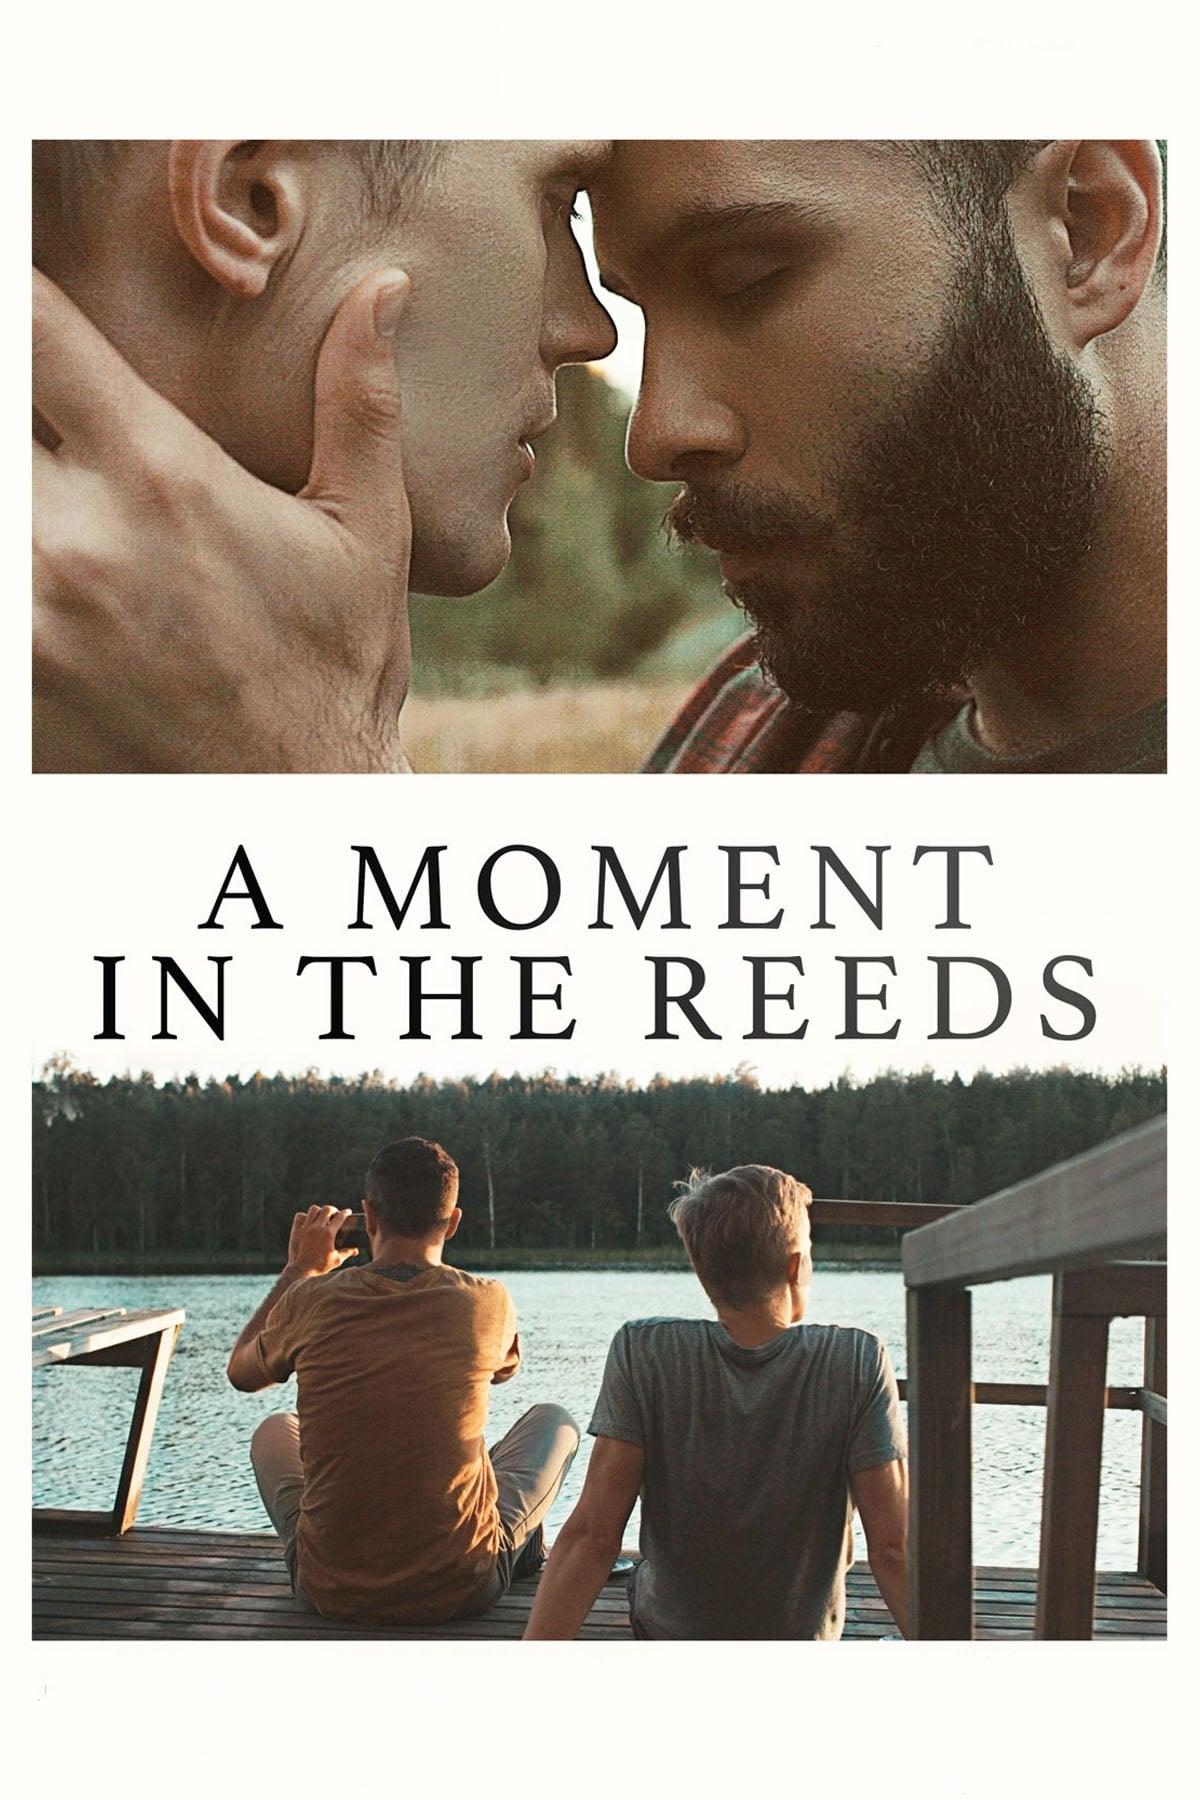 A Moment in the Reeds poster